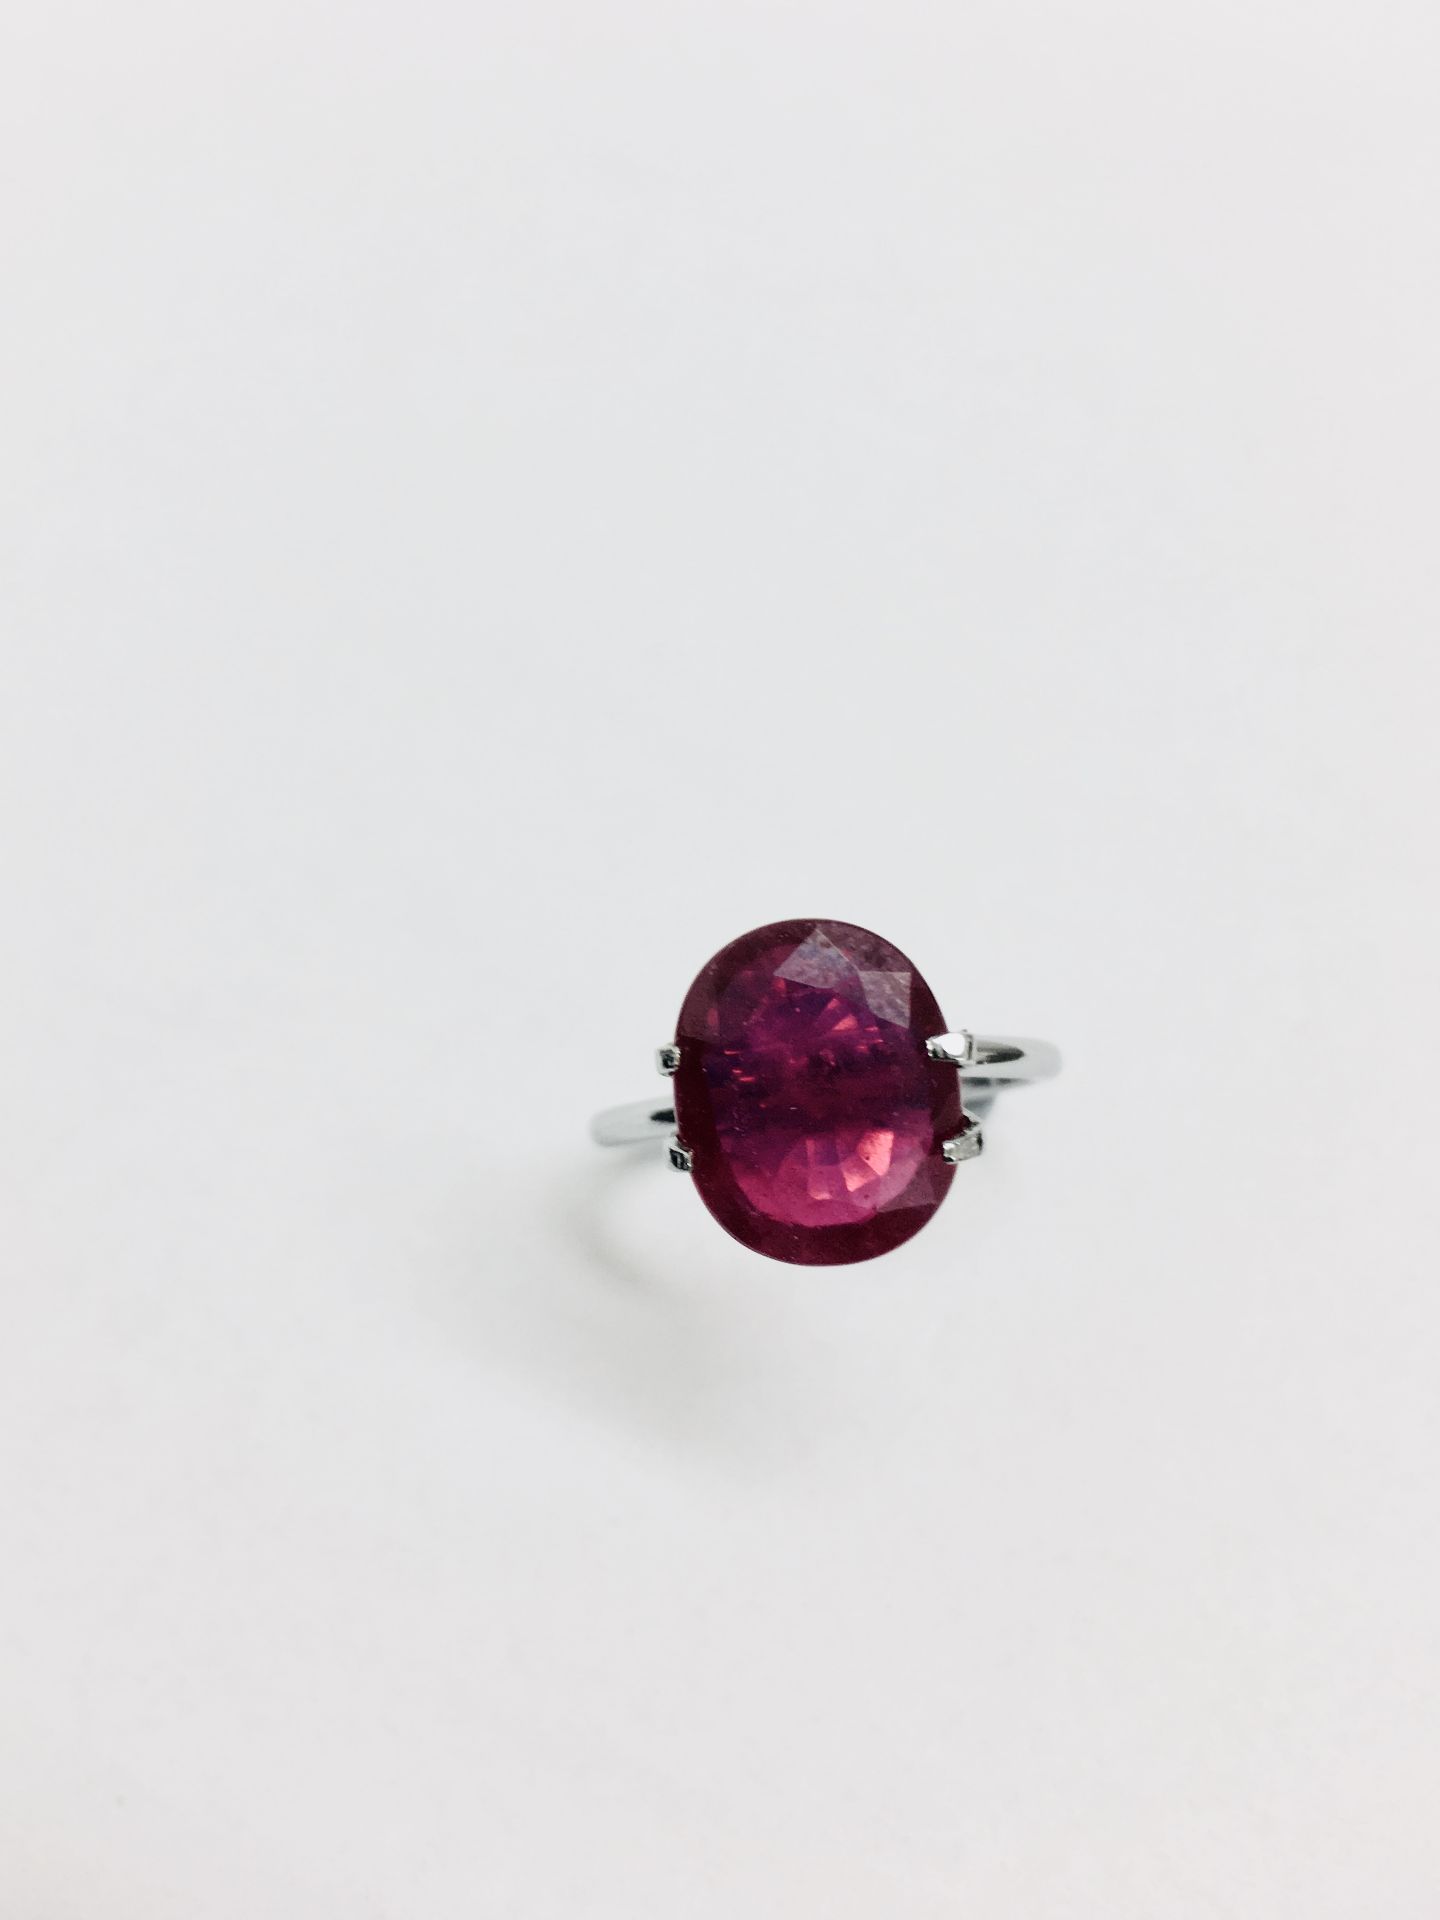 4.41ct ruby,Enhanced by Frature,good clarity and colour,12mmx10mm ,valued at 800 - Image 4 of 4